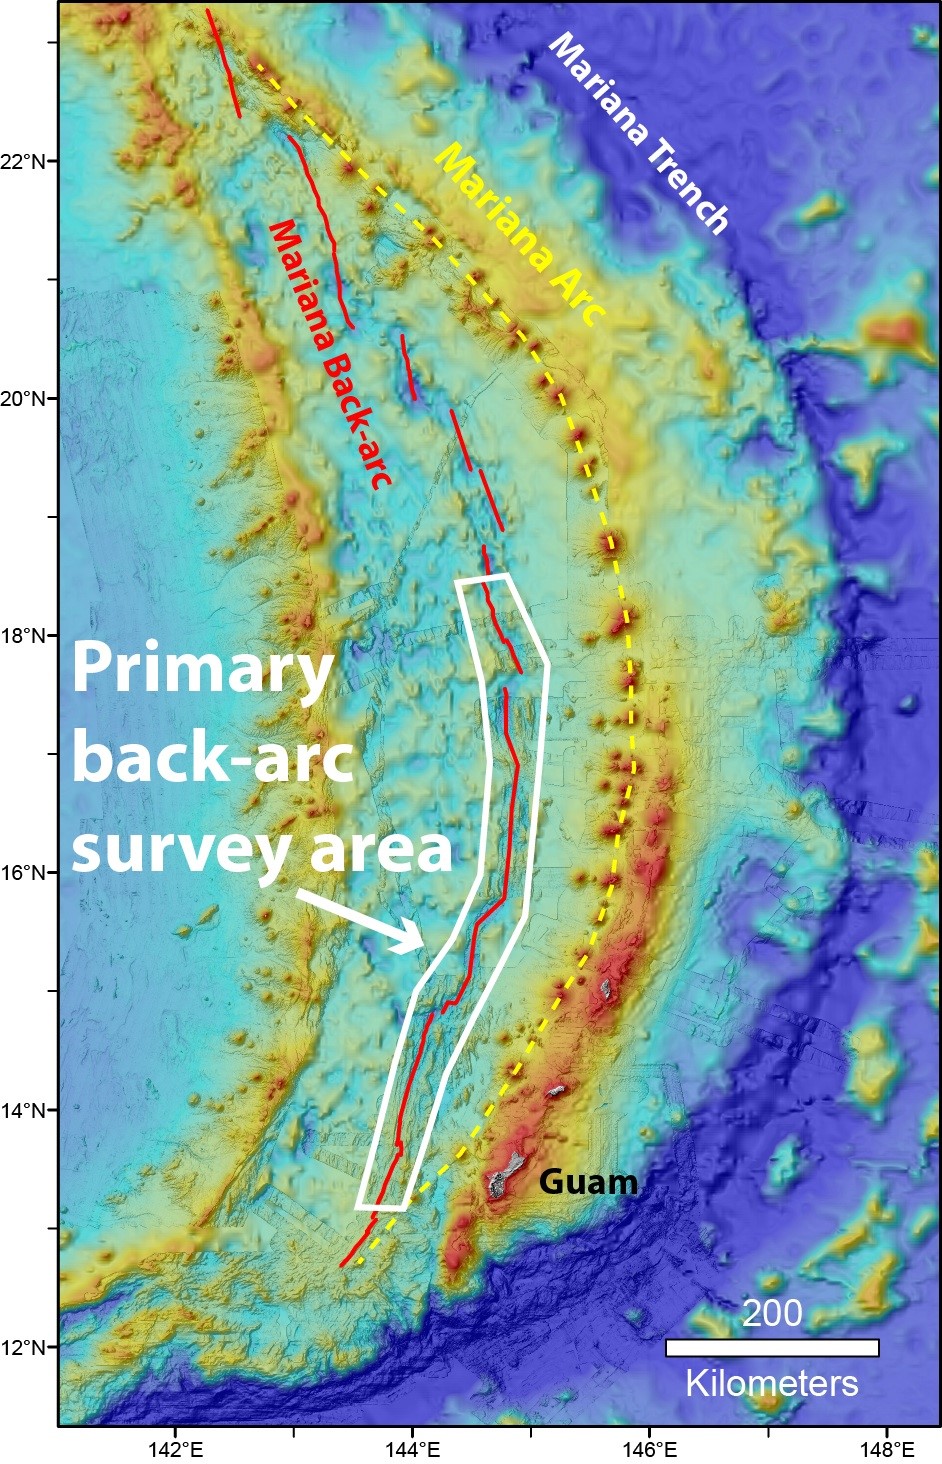 Map showing the locations of the Mariana Trench (white dashed line), Volcanic Arc (yellow dashed line), and Back-arc (red line). Image credit: SOI / Bill Chadwick